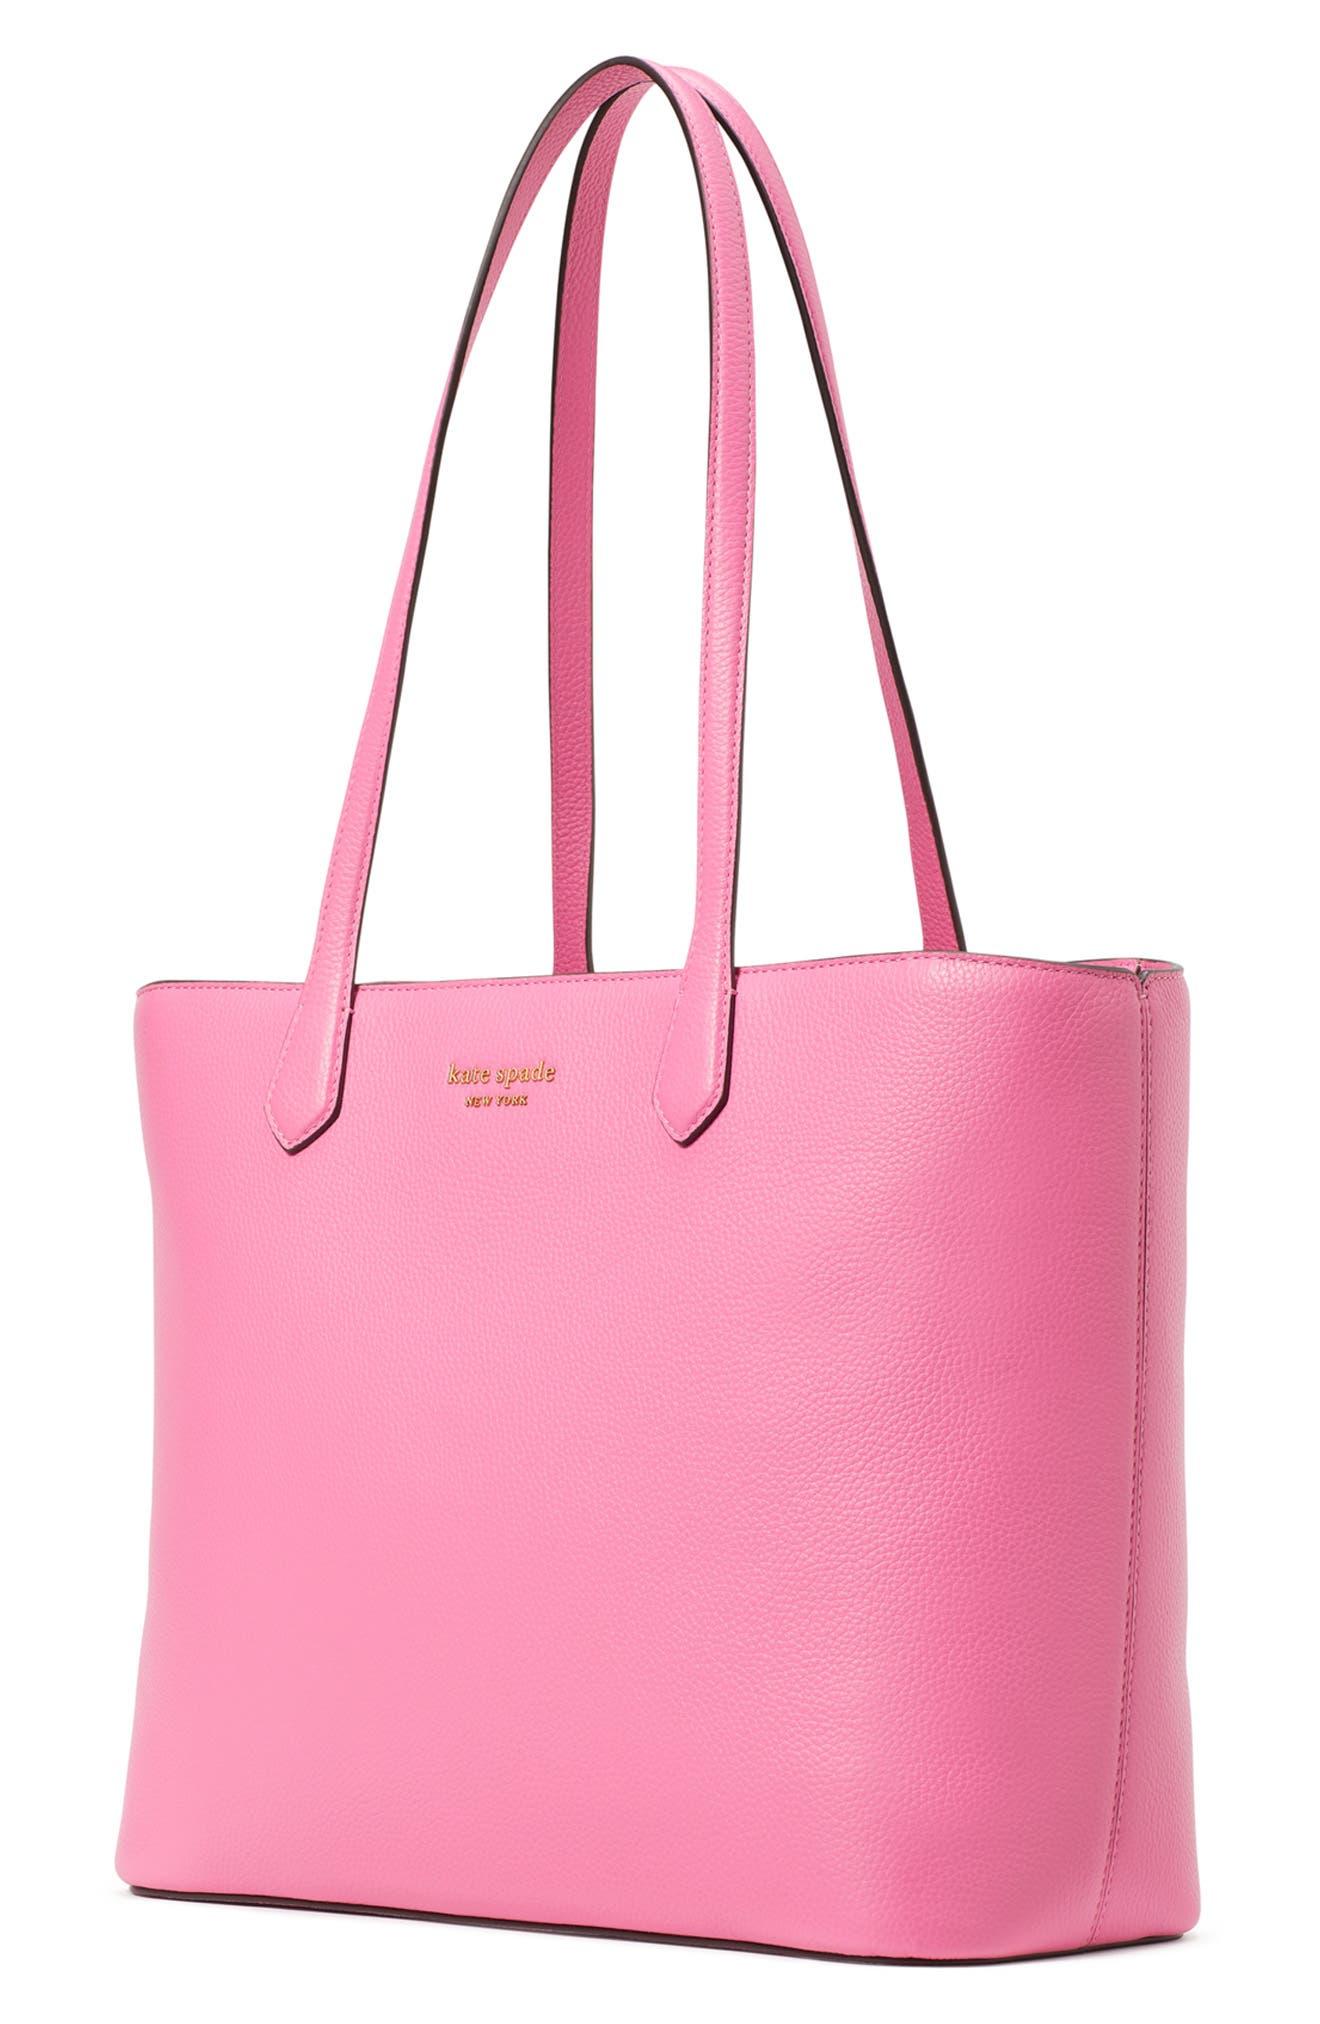 kate spade new york gramercy large pebbled leather tote bag